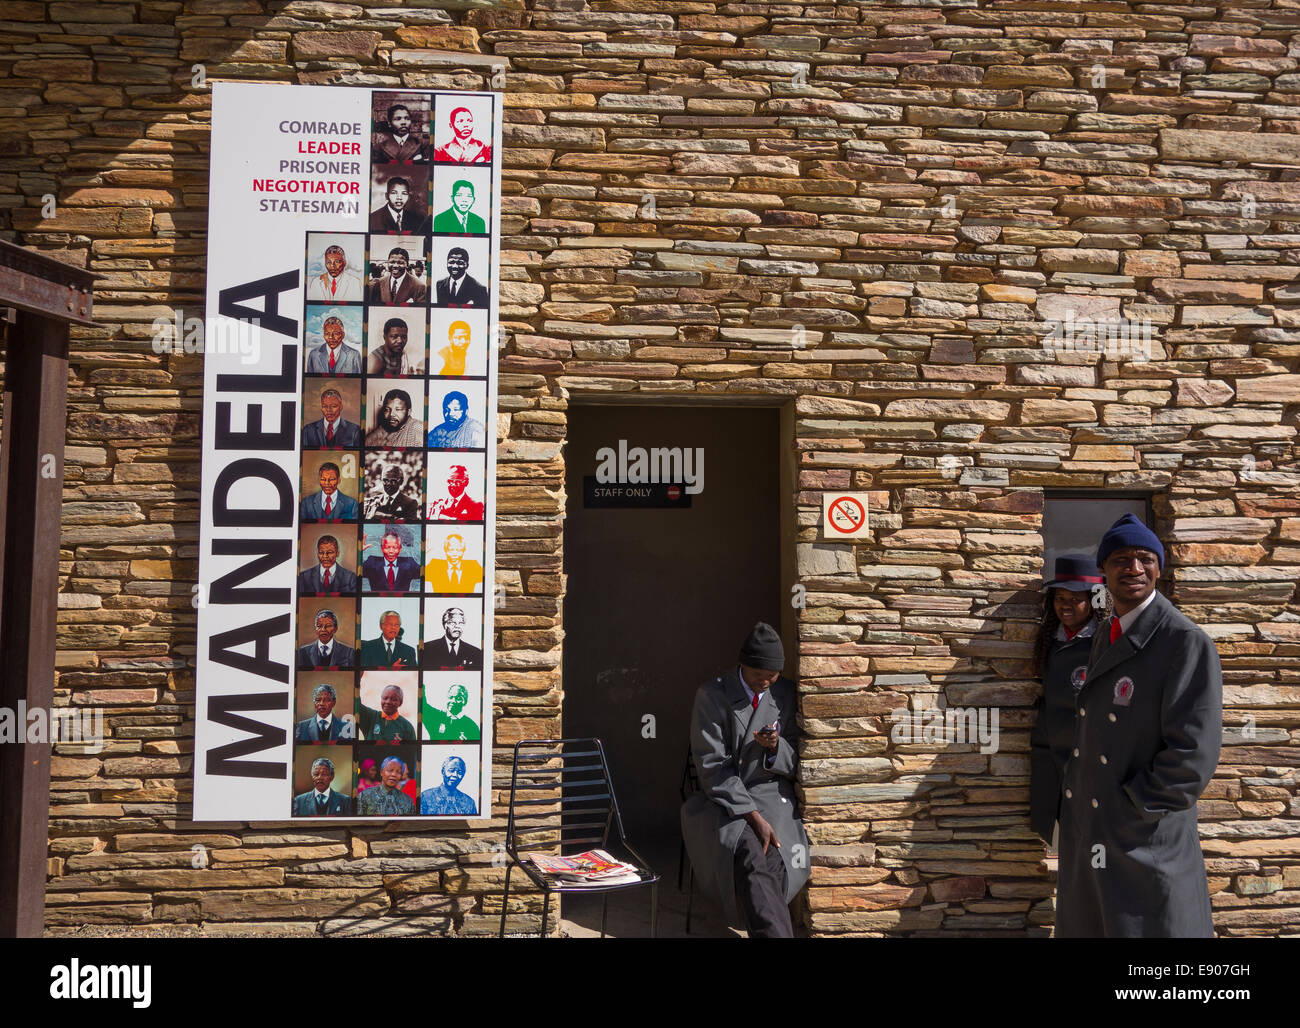 JOHANNESBURG, SOUTH AFRICA - Nelson Mandela exhibit poster at the Apartheid Museum and staff. Stock Photo